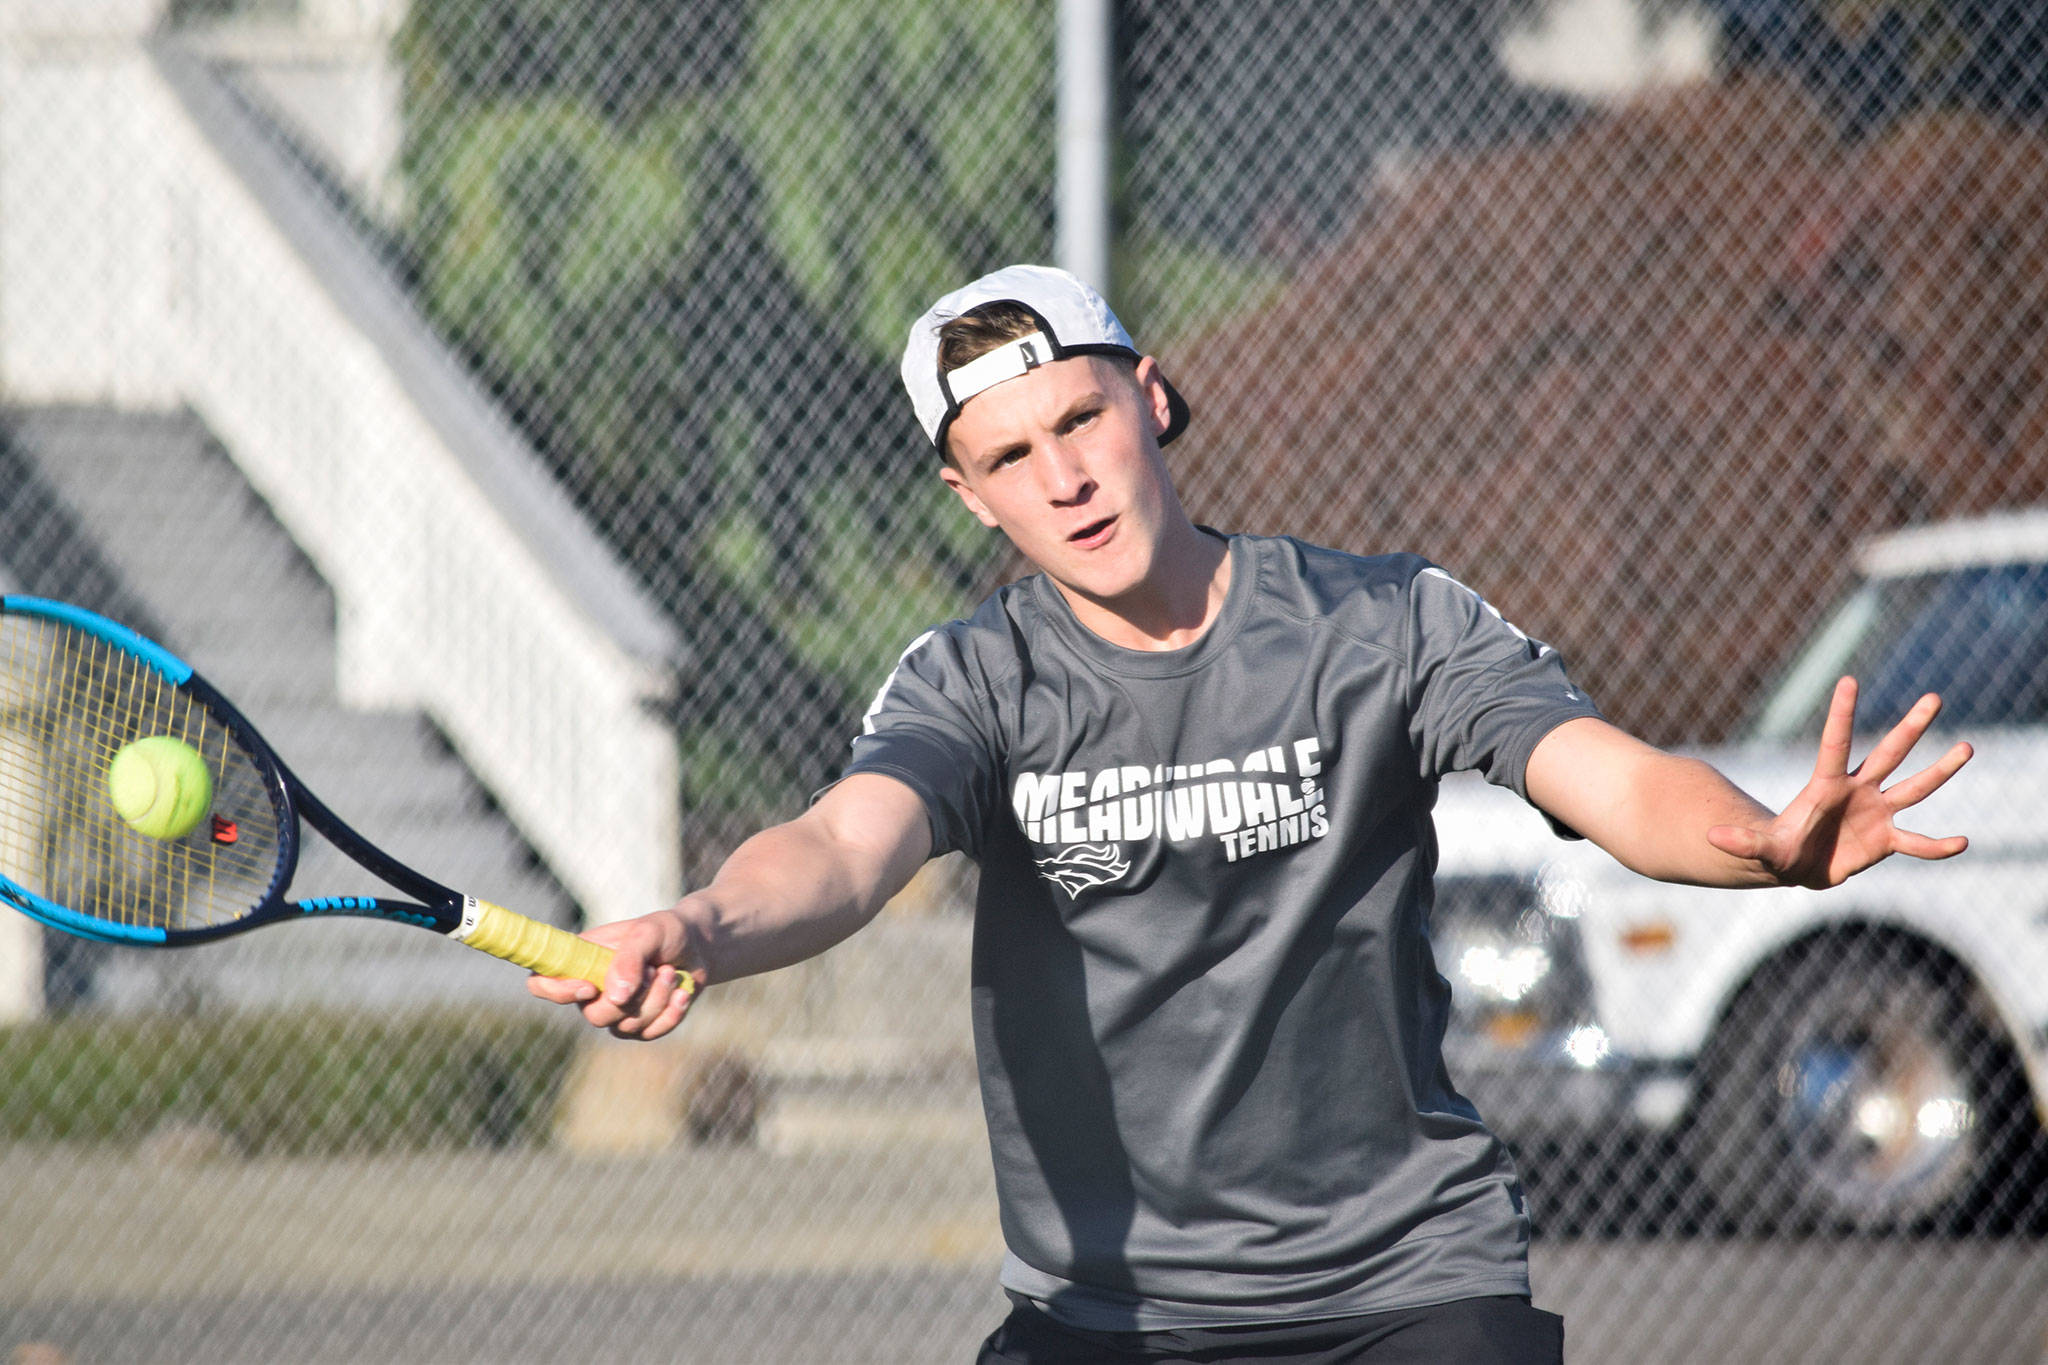 Meadowdale’s Ben Fahey plays doubles against Marysville Pilchuck on Thursday, Oct. 10 at Totem Middle School. (Katie Webber / The Herald)